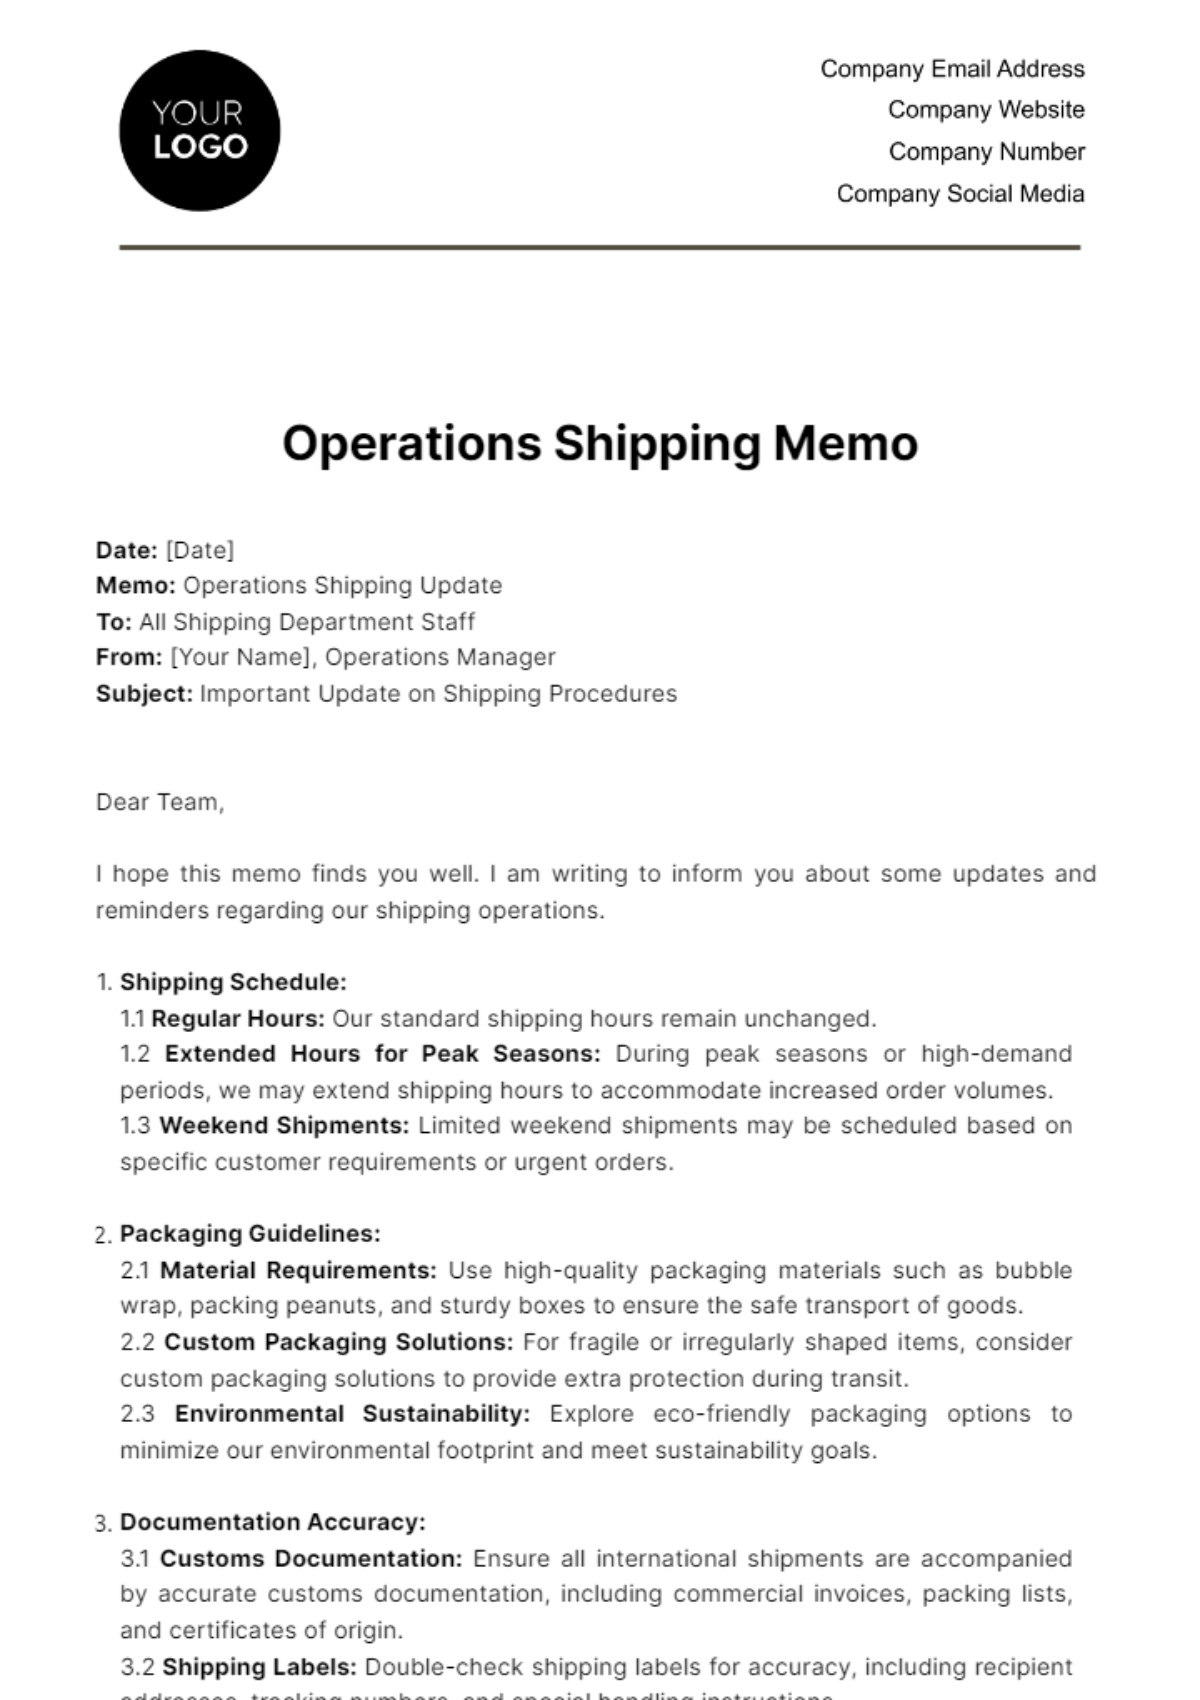 Operations Shipping Memo Template